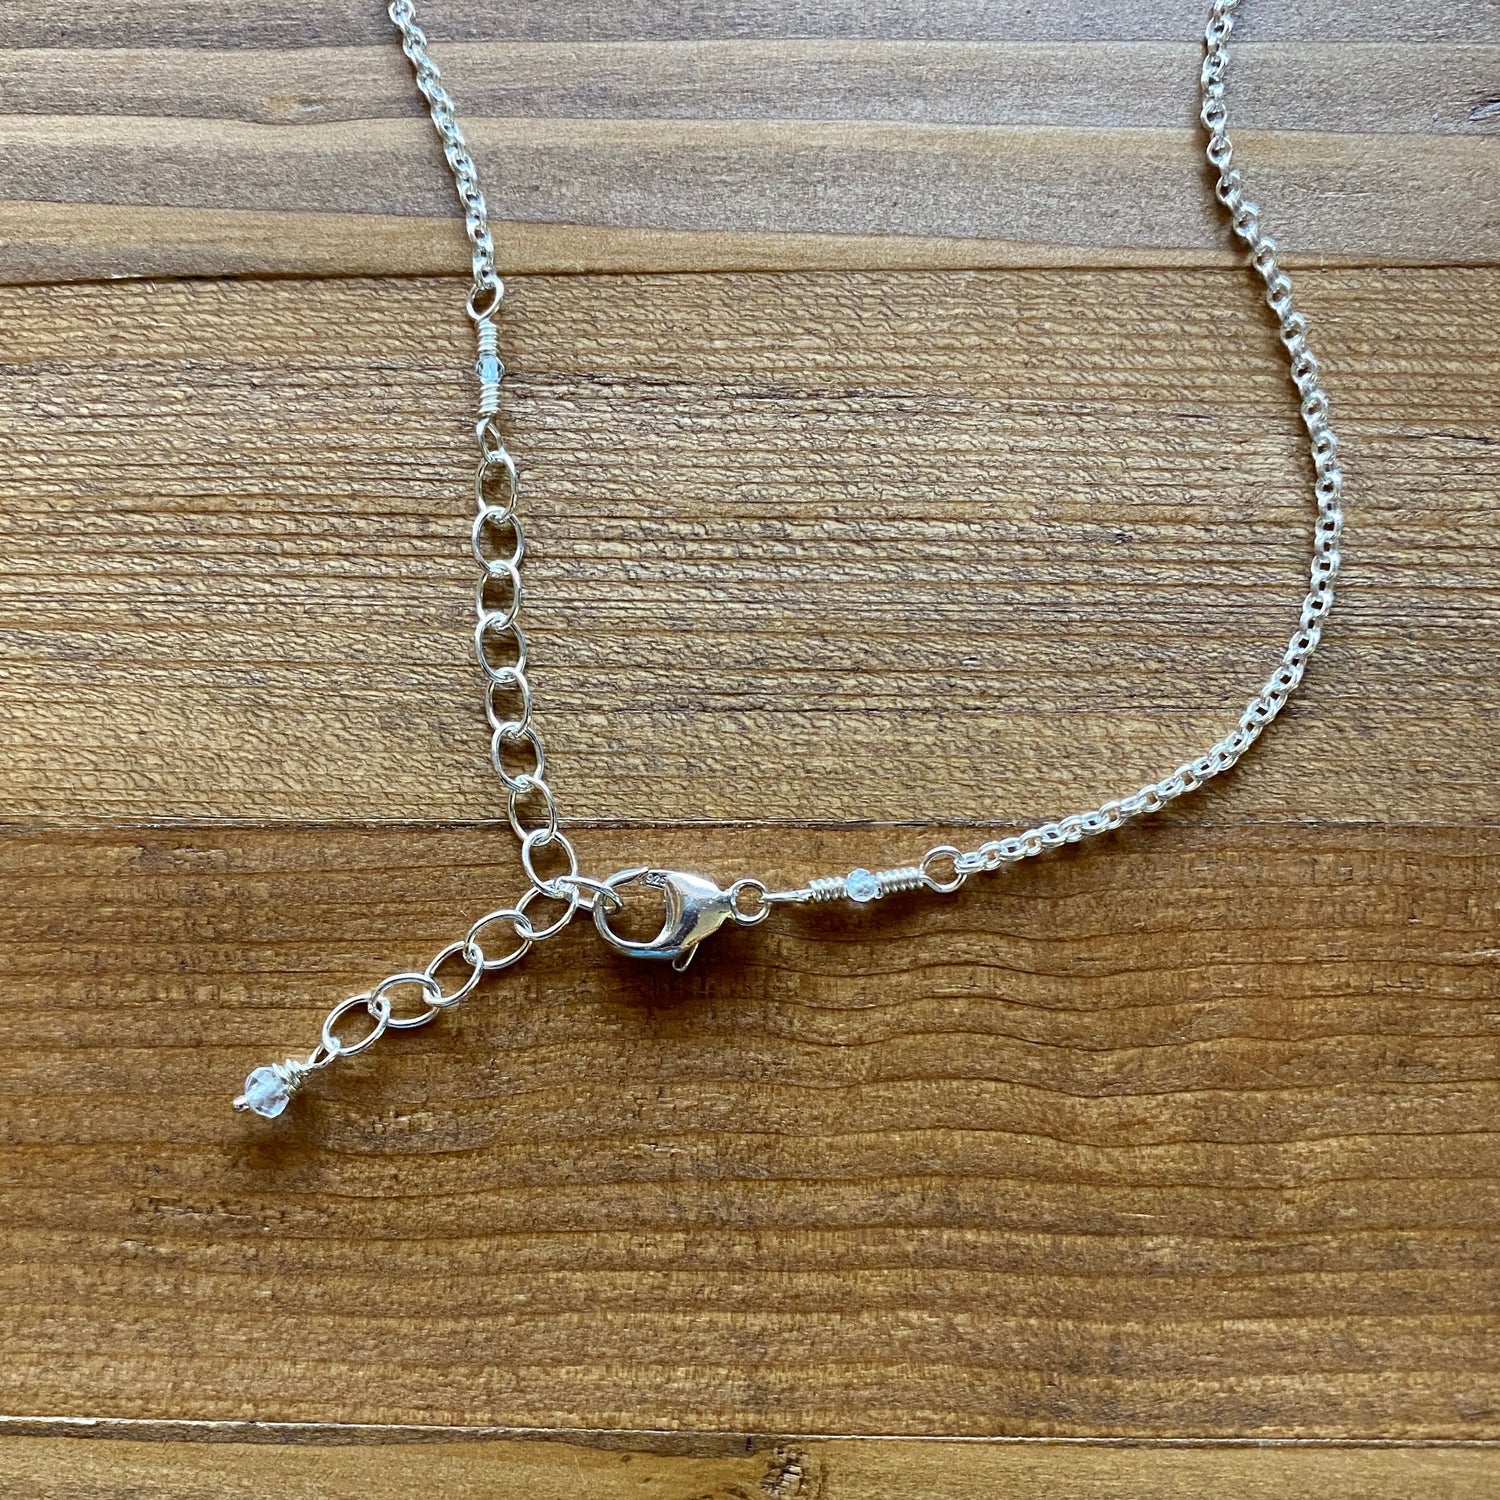 20th Birthday Mid Size Sterling Silver Milestone Necklace, Two Rings for Two Decades, Perfectly Imperfect Unique Gift for 2 Friends